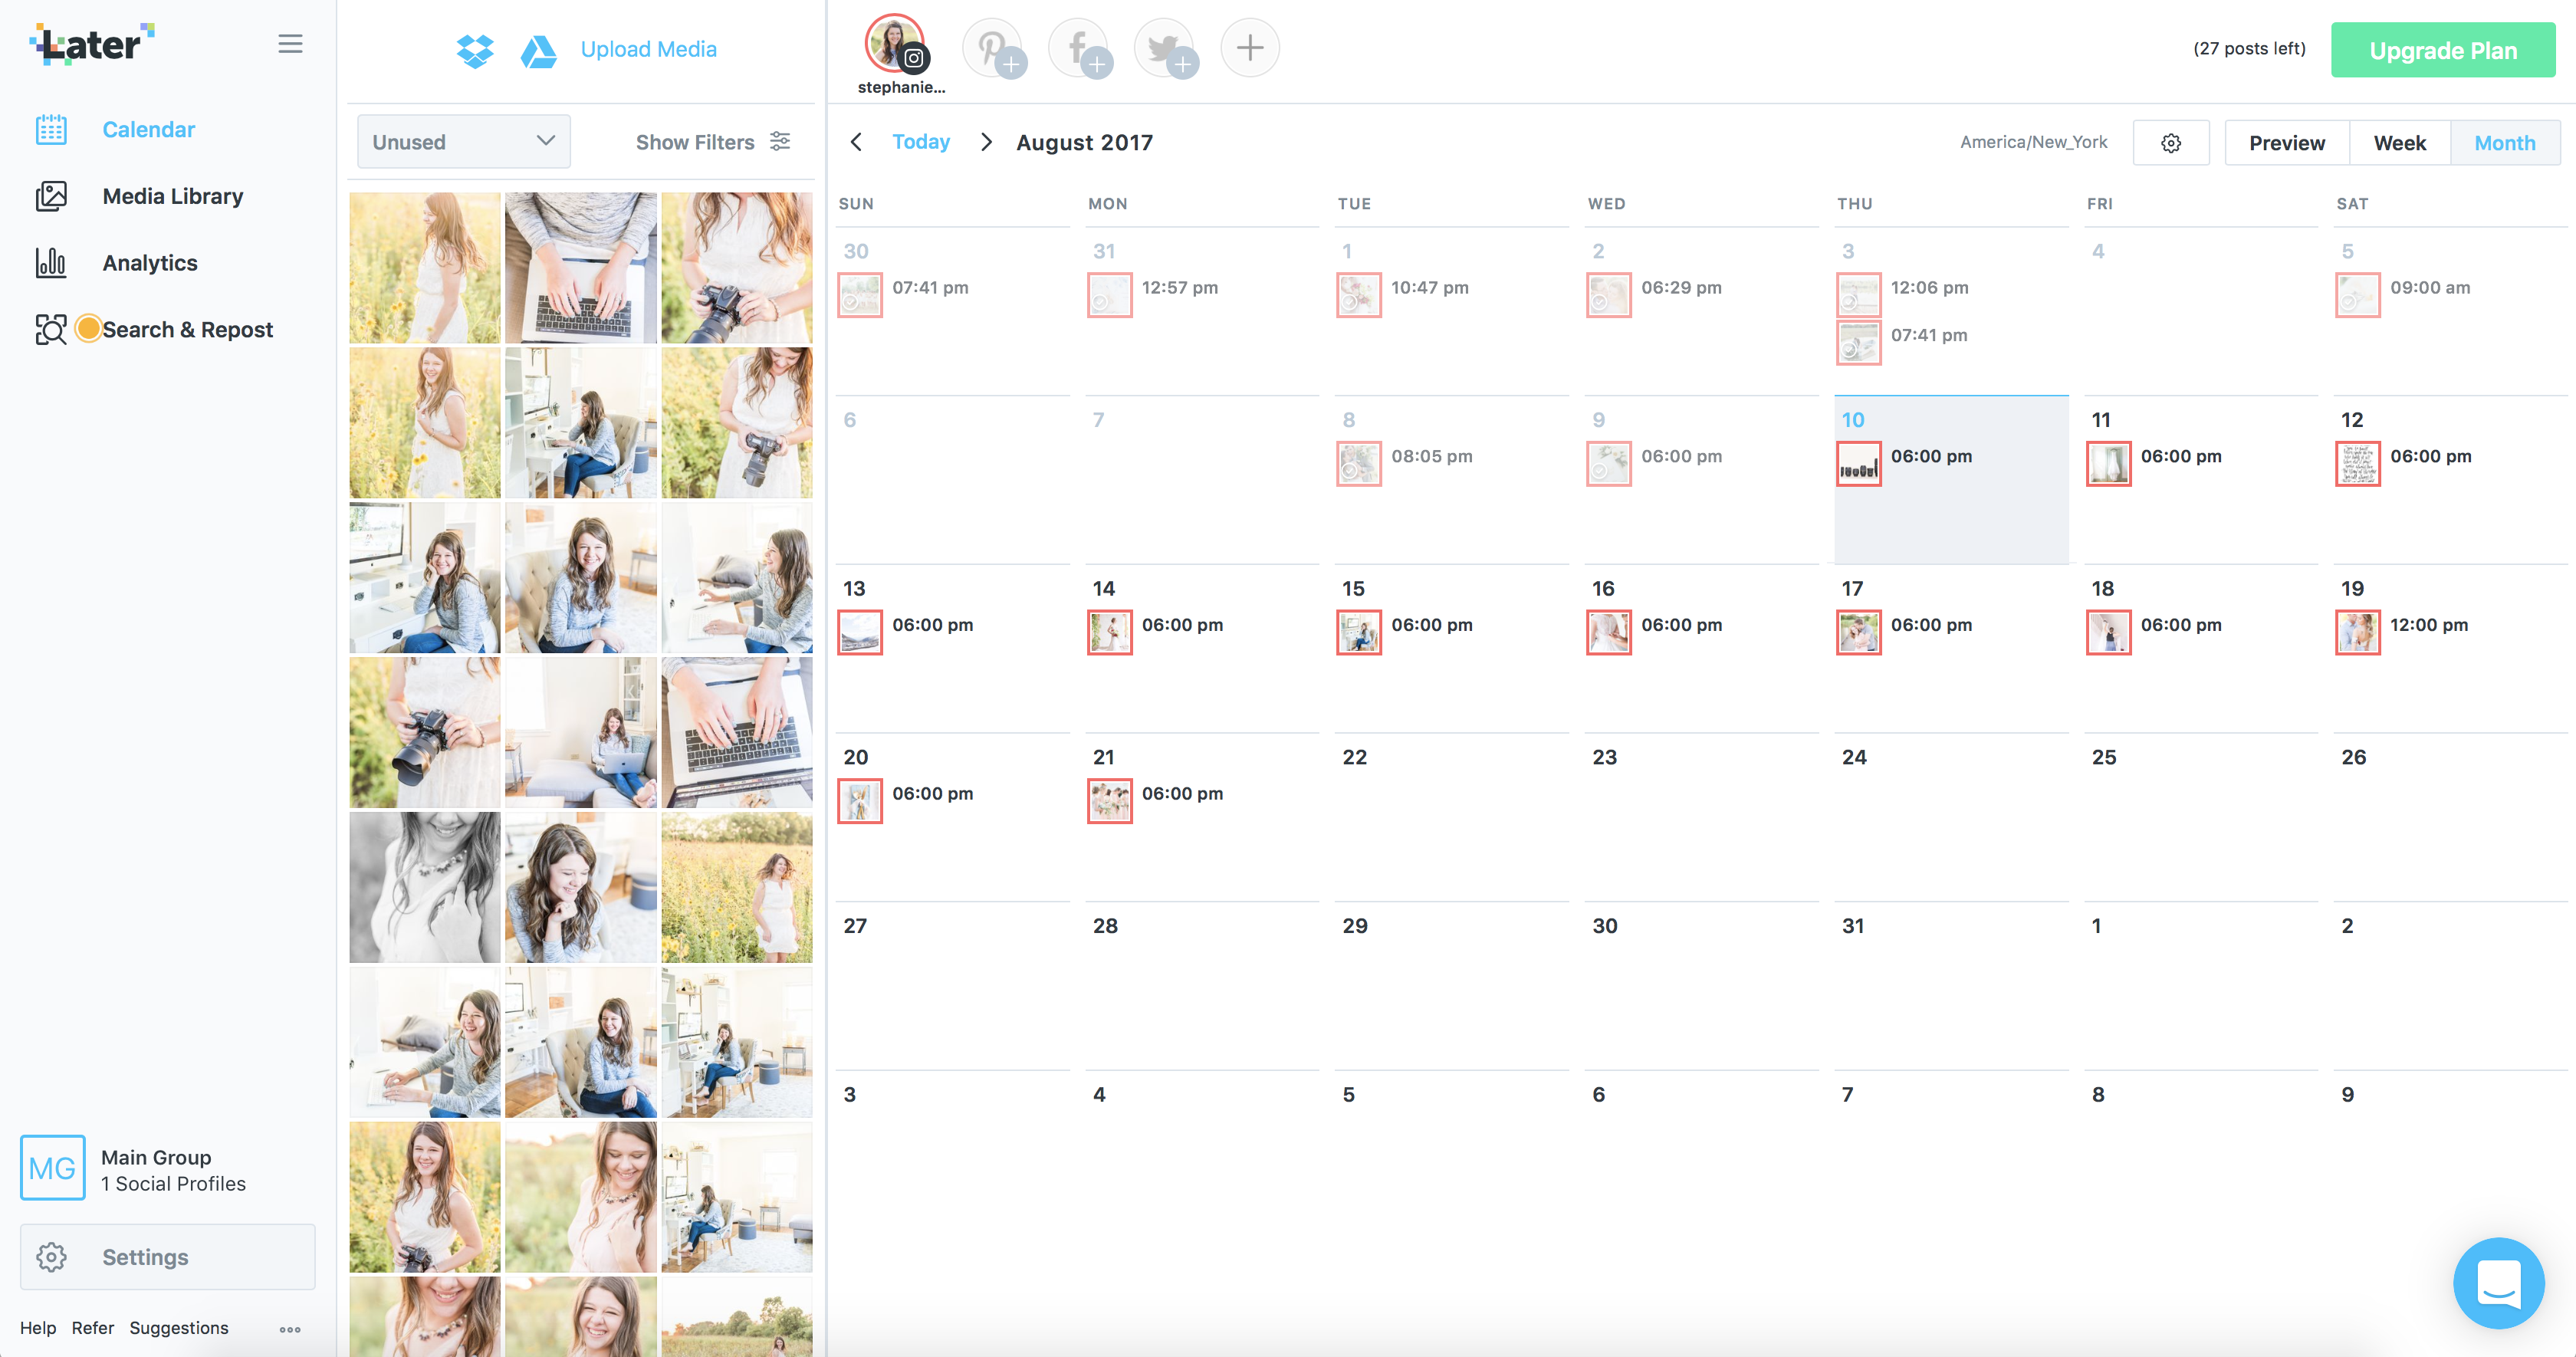 how-to-plan-out-your-instagram-posts-so-you-can-see-them